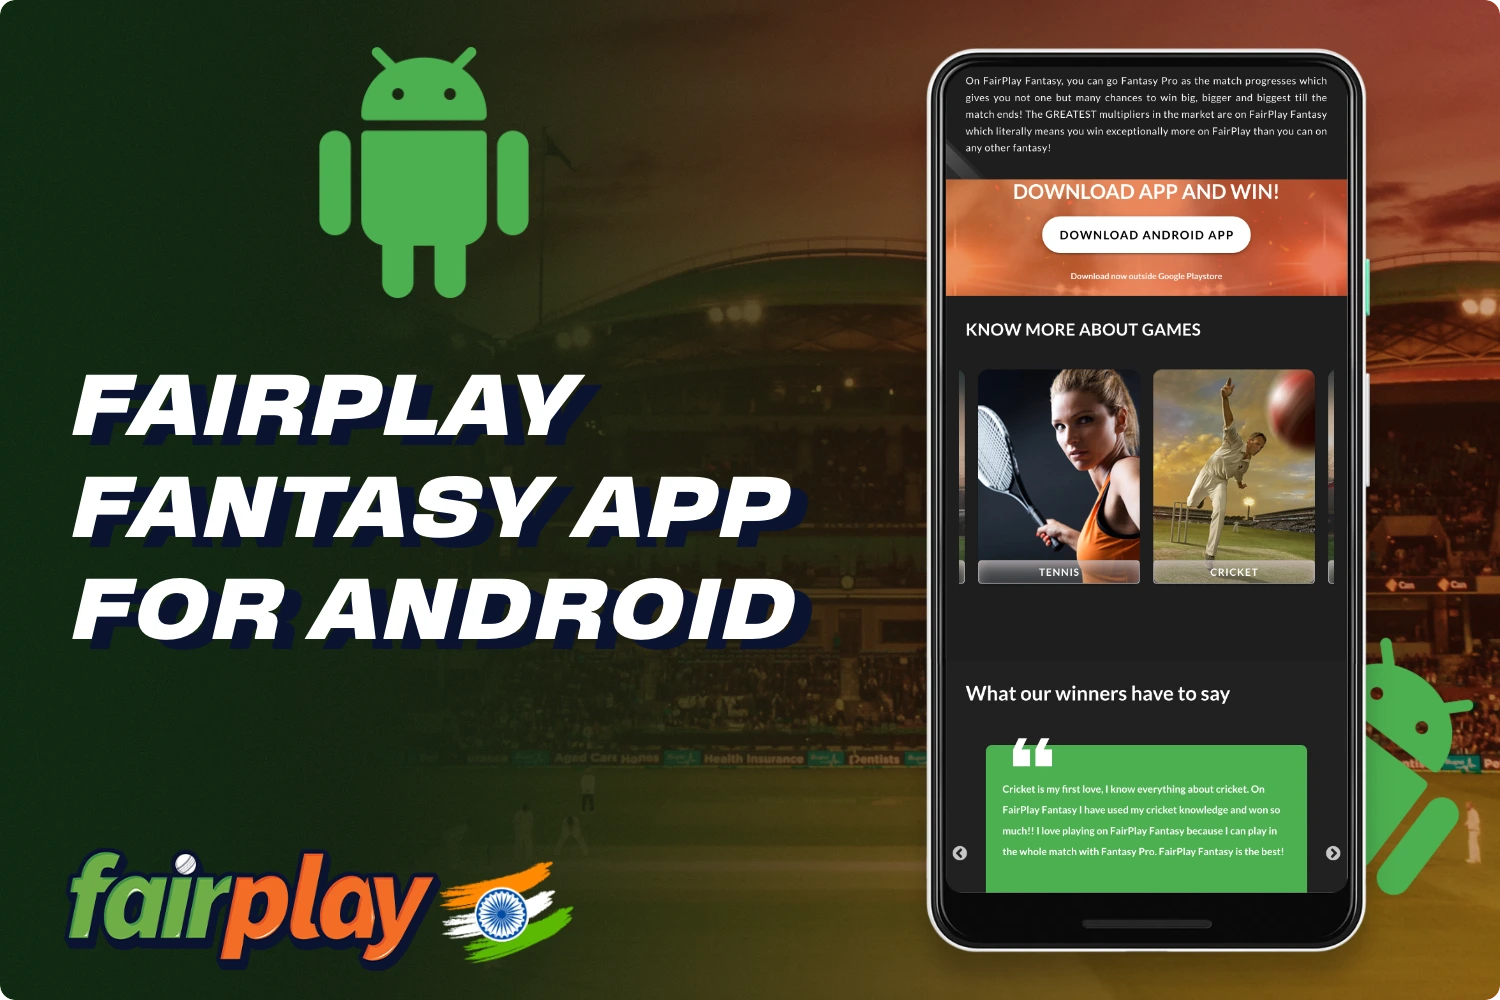 Download the Fairplay mobile app for Android for fantasy sports betting from the official website